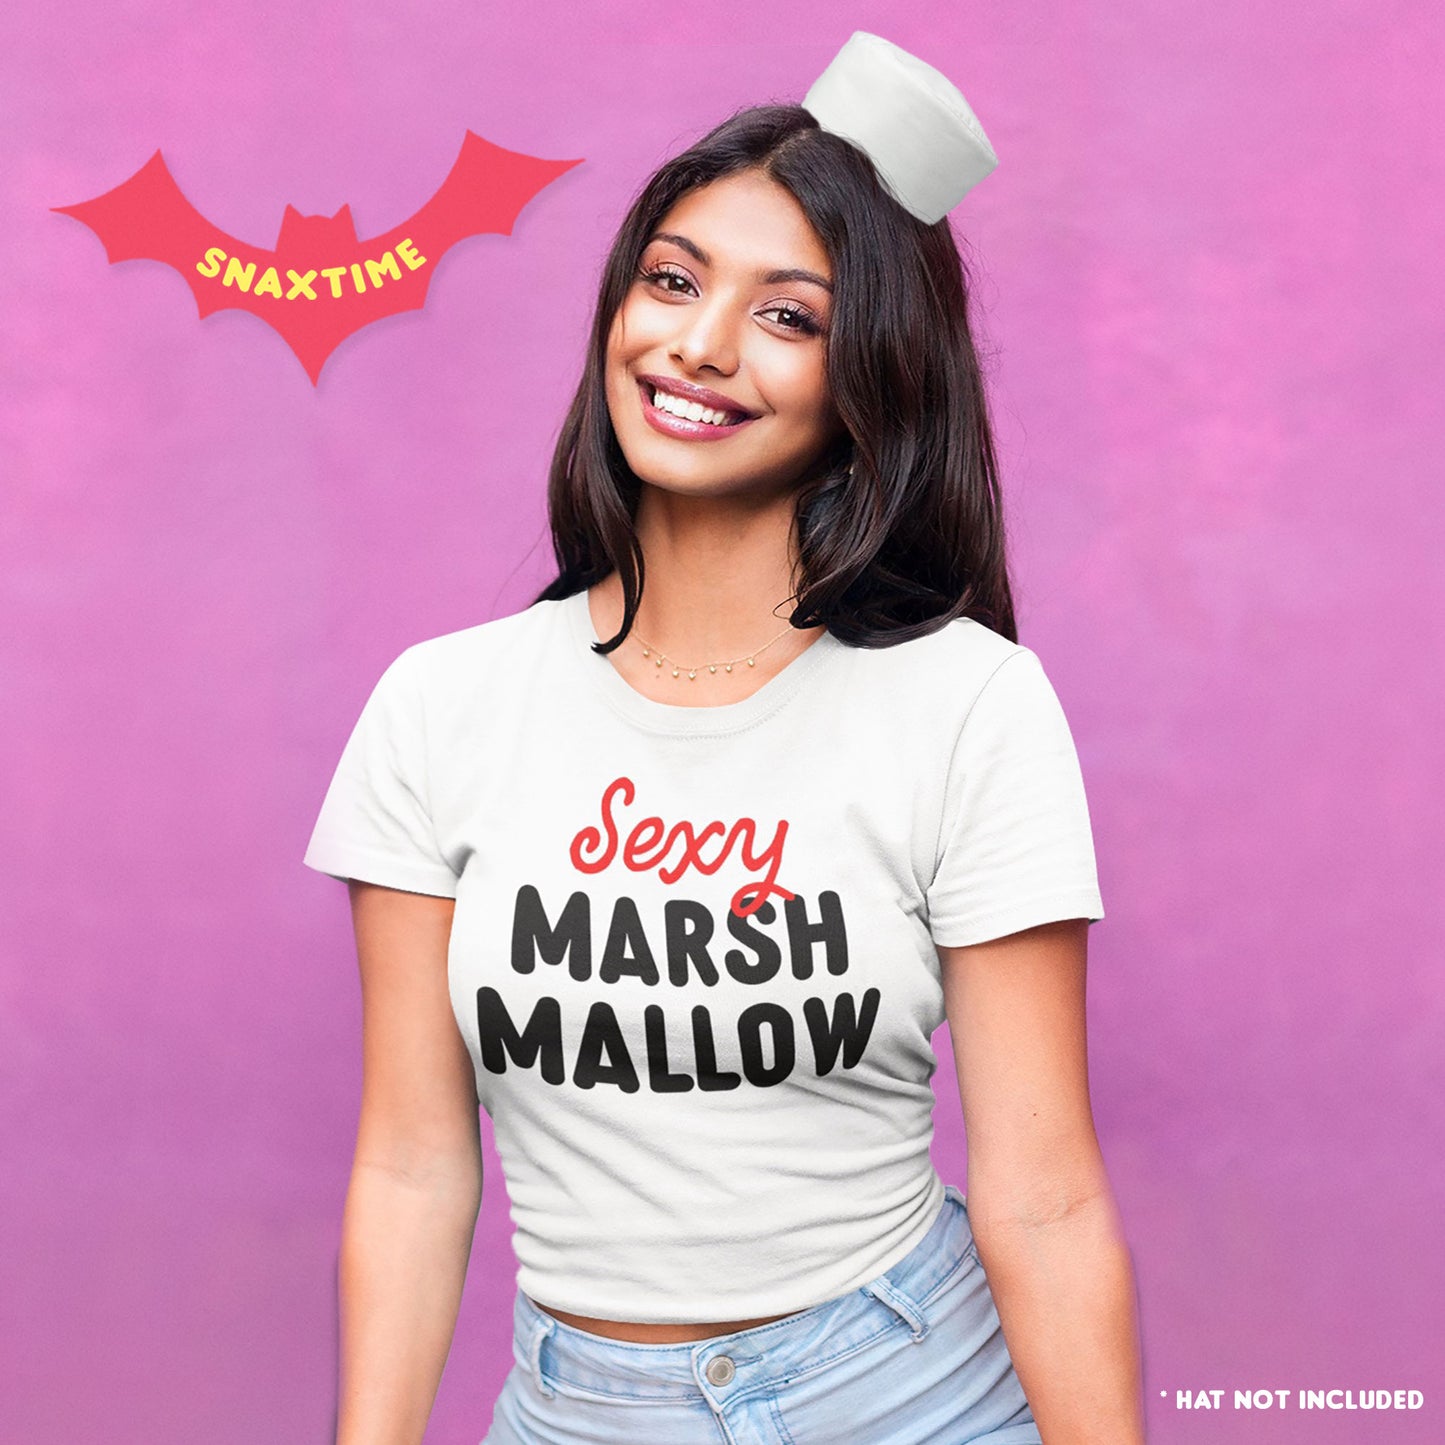  Sexy Marshmallow Halloween Costume Women's Graphic T-Shirt by Snaxtime